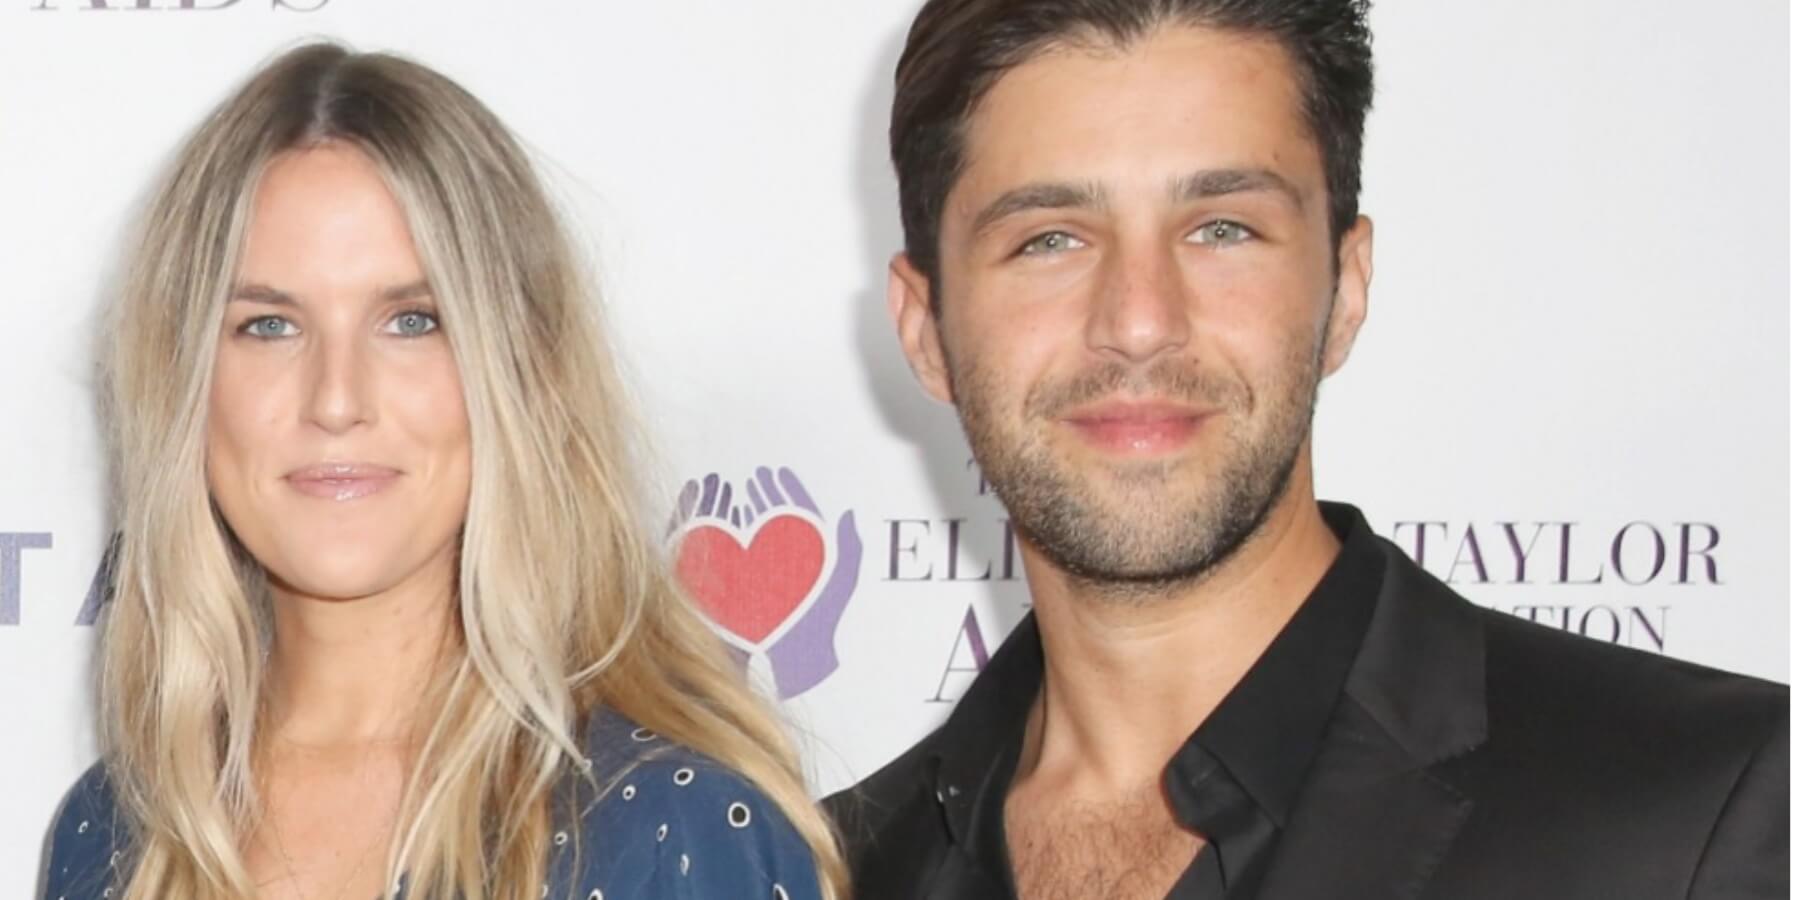 Josh Peck's and his wife Paige O'Brien have had their share of holiday mishaps.